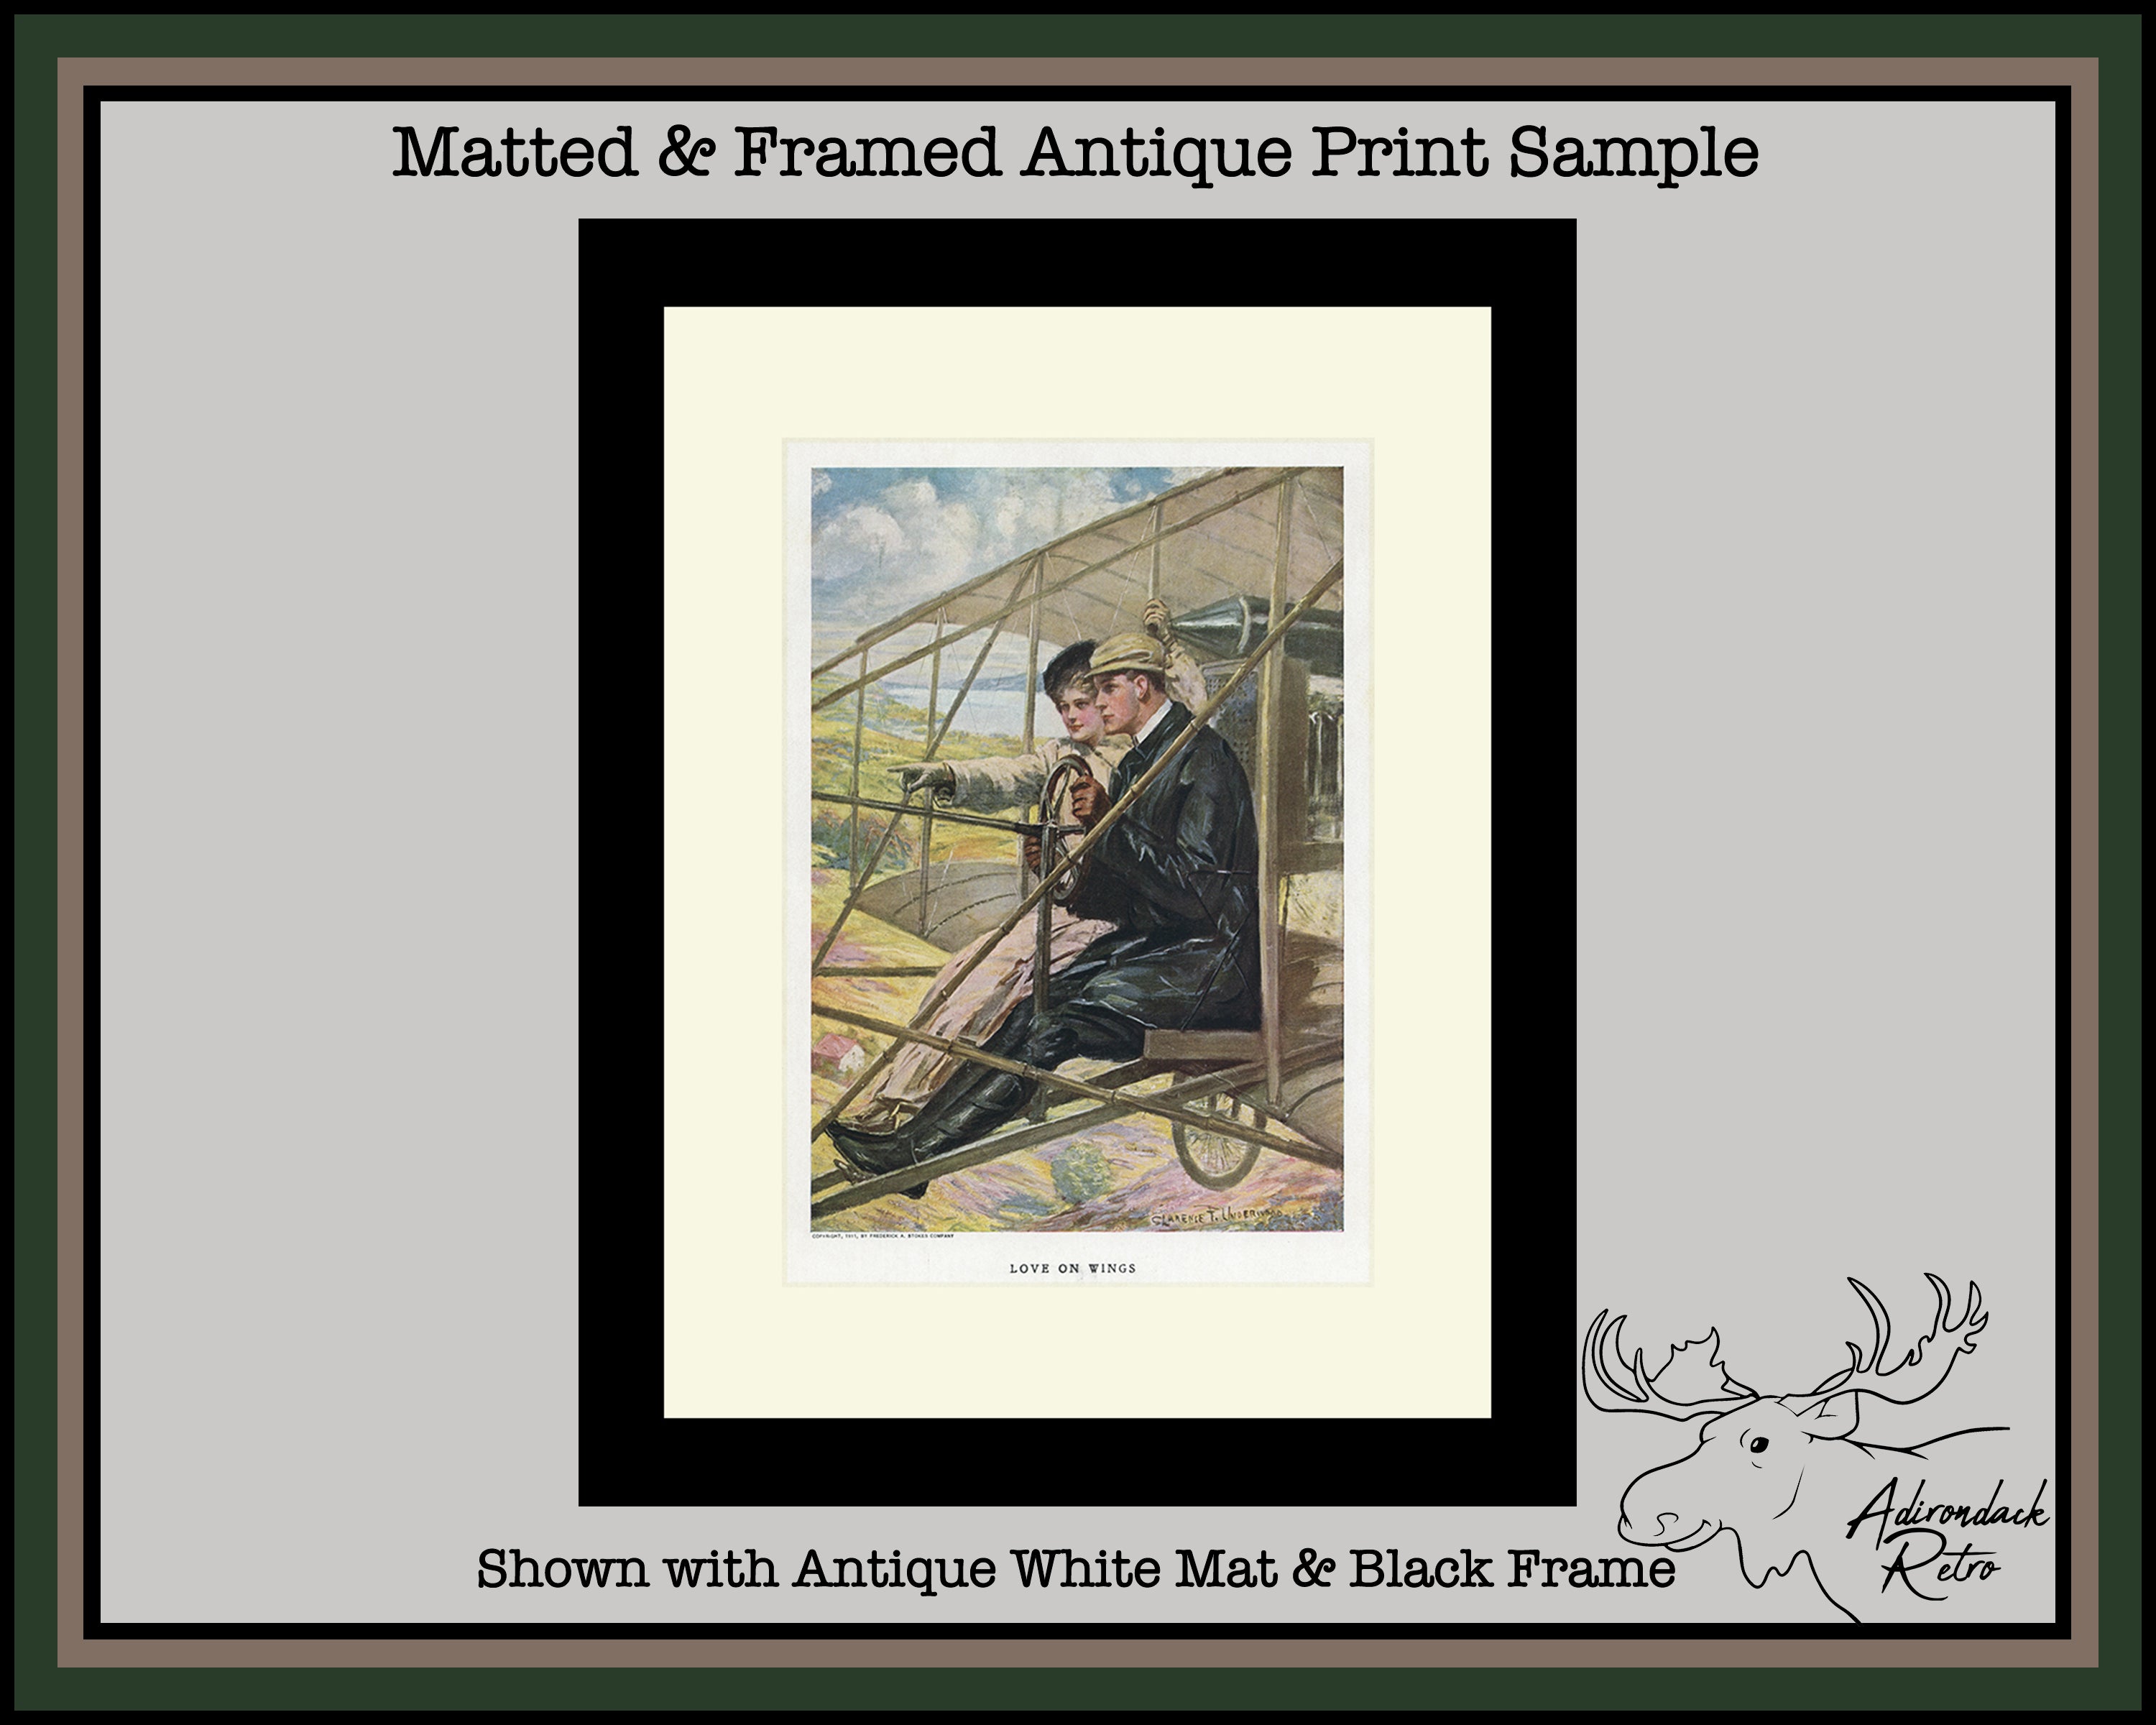 Adirondack Retro Matted & Framed Antique Print Sample with Antique White Mat